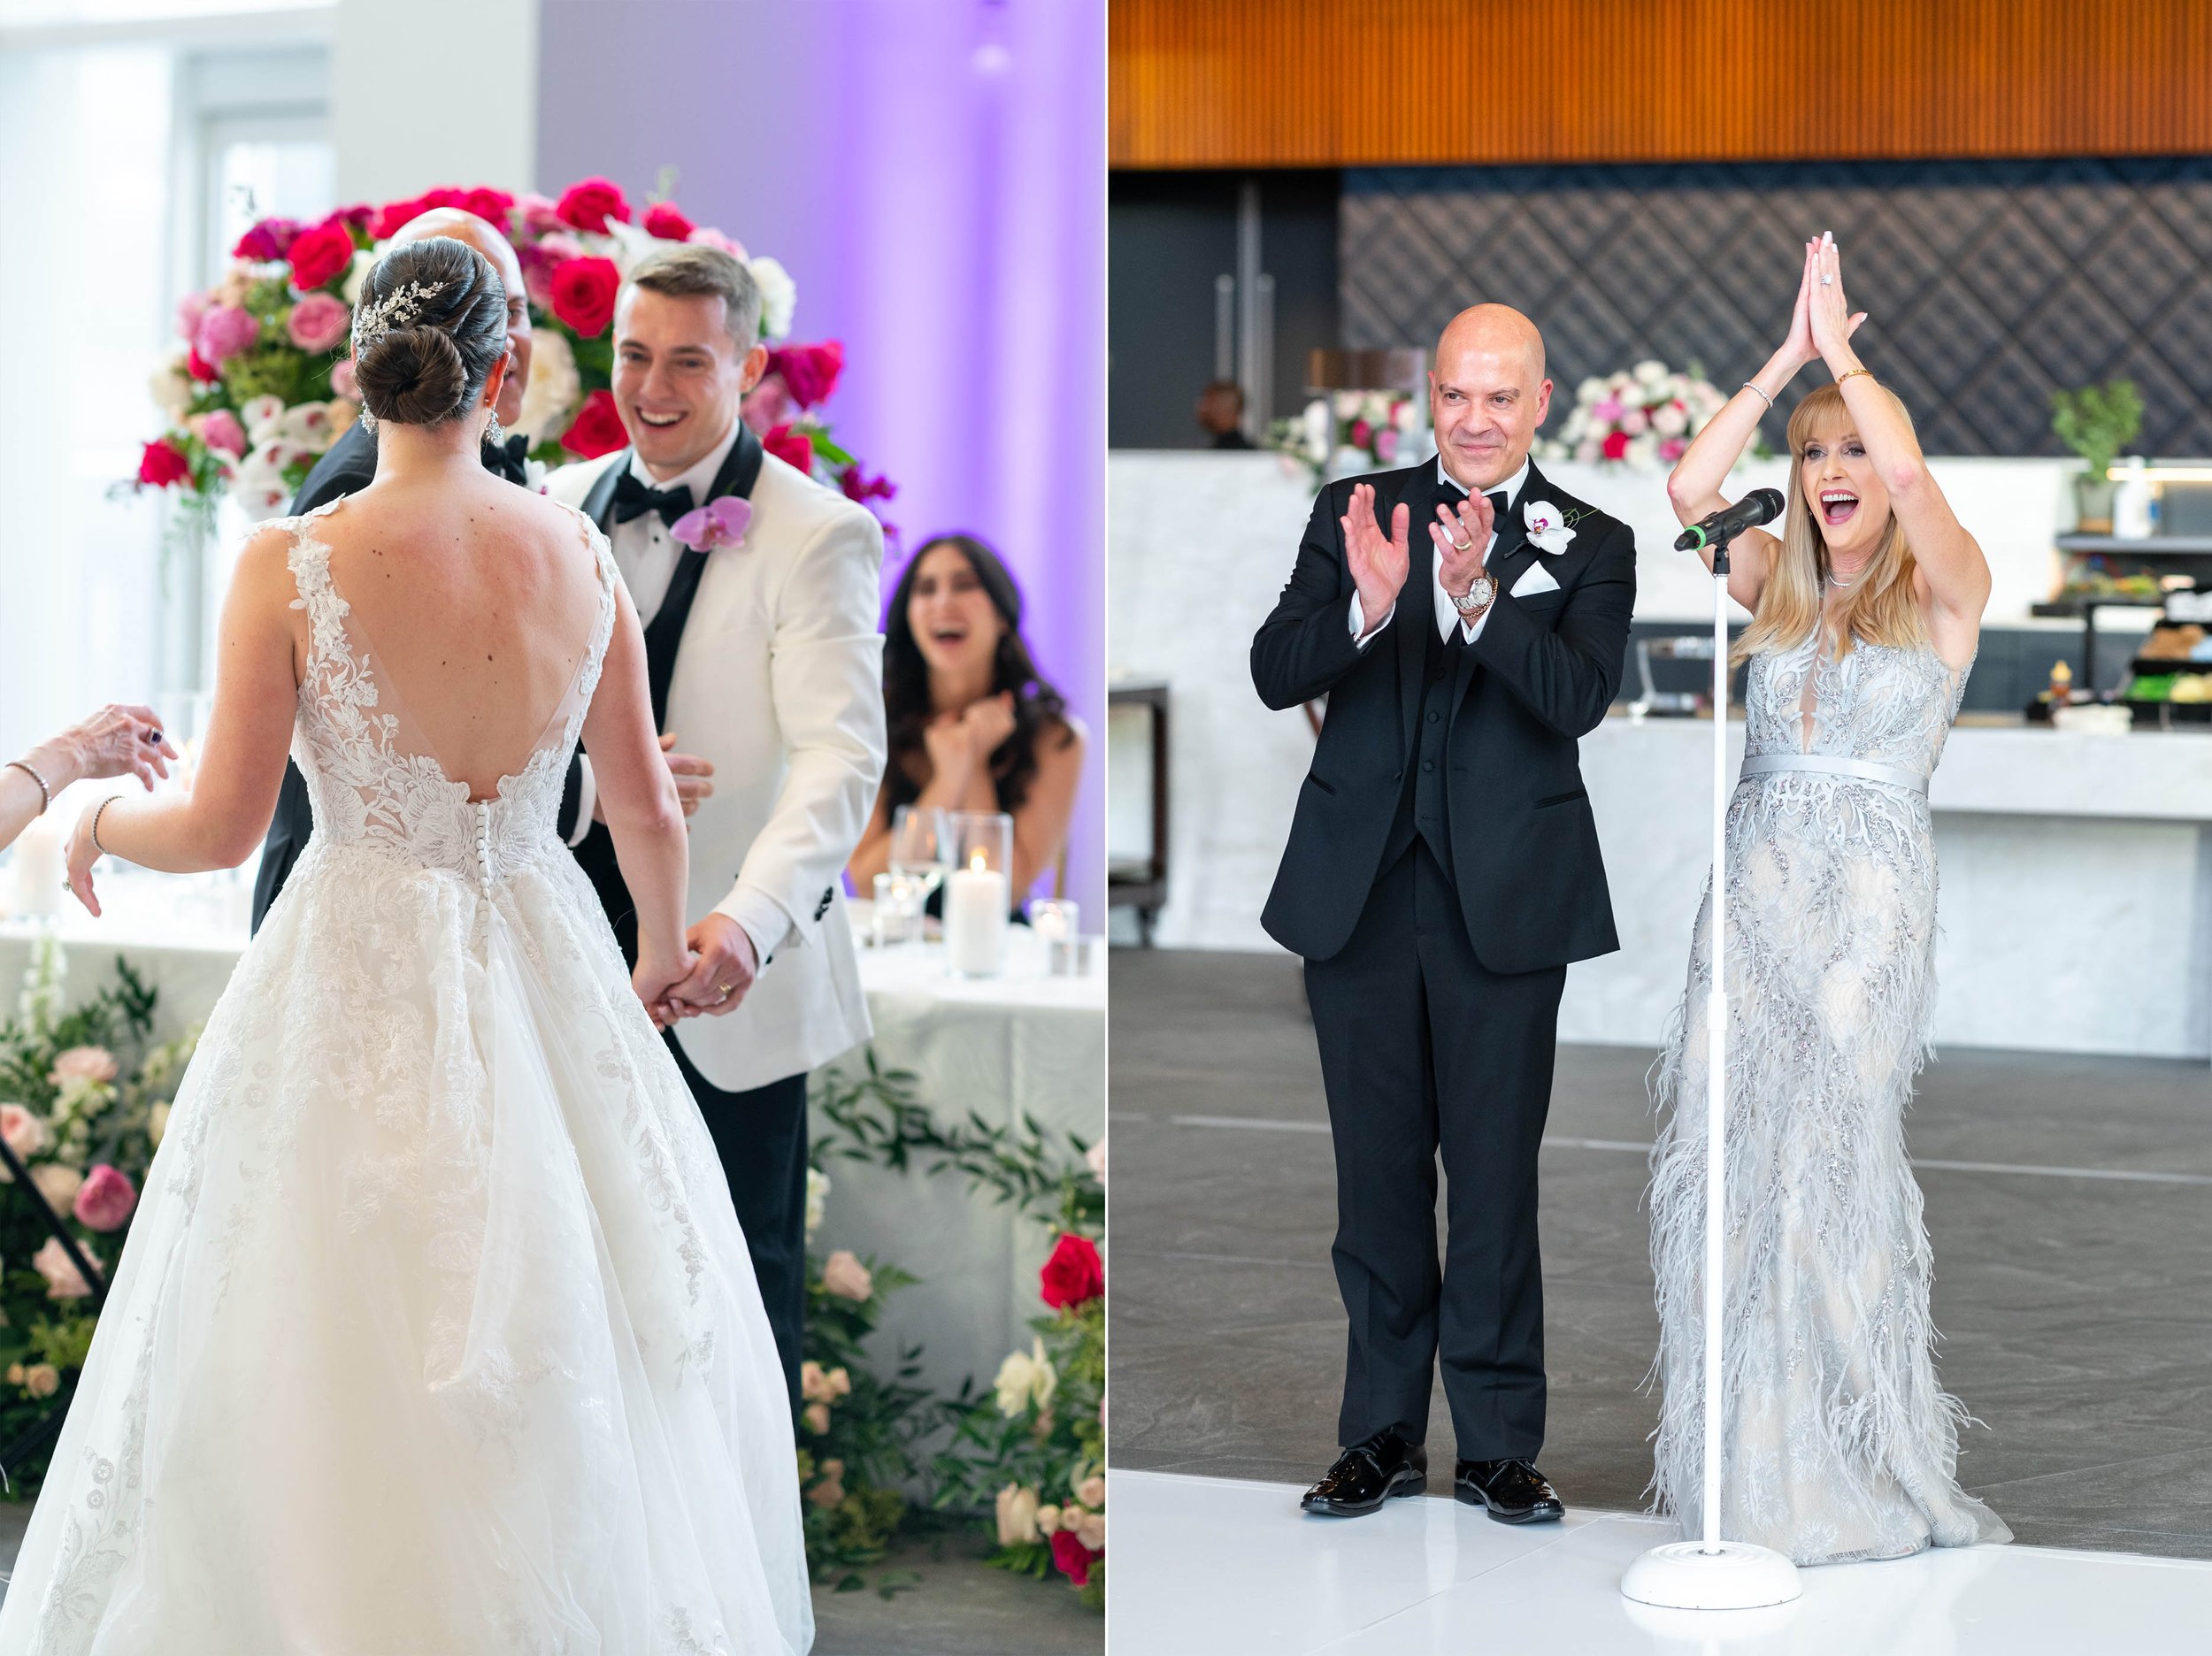 Parents cheer bride and groom's first dance as the couple laughs